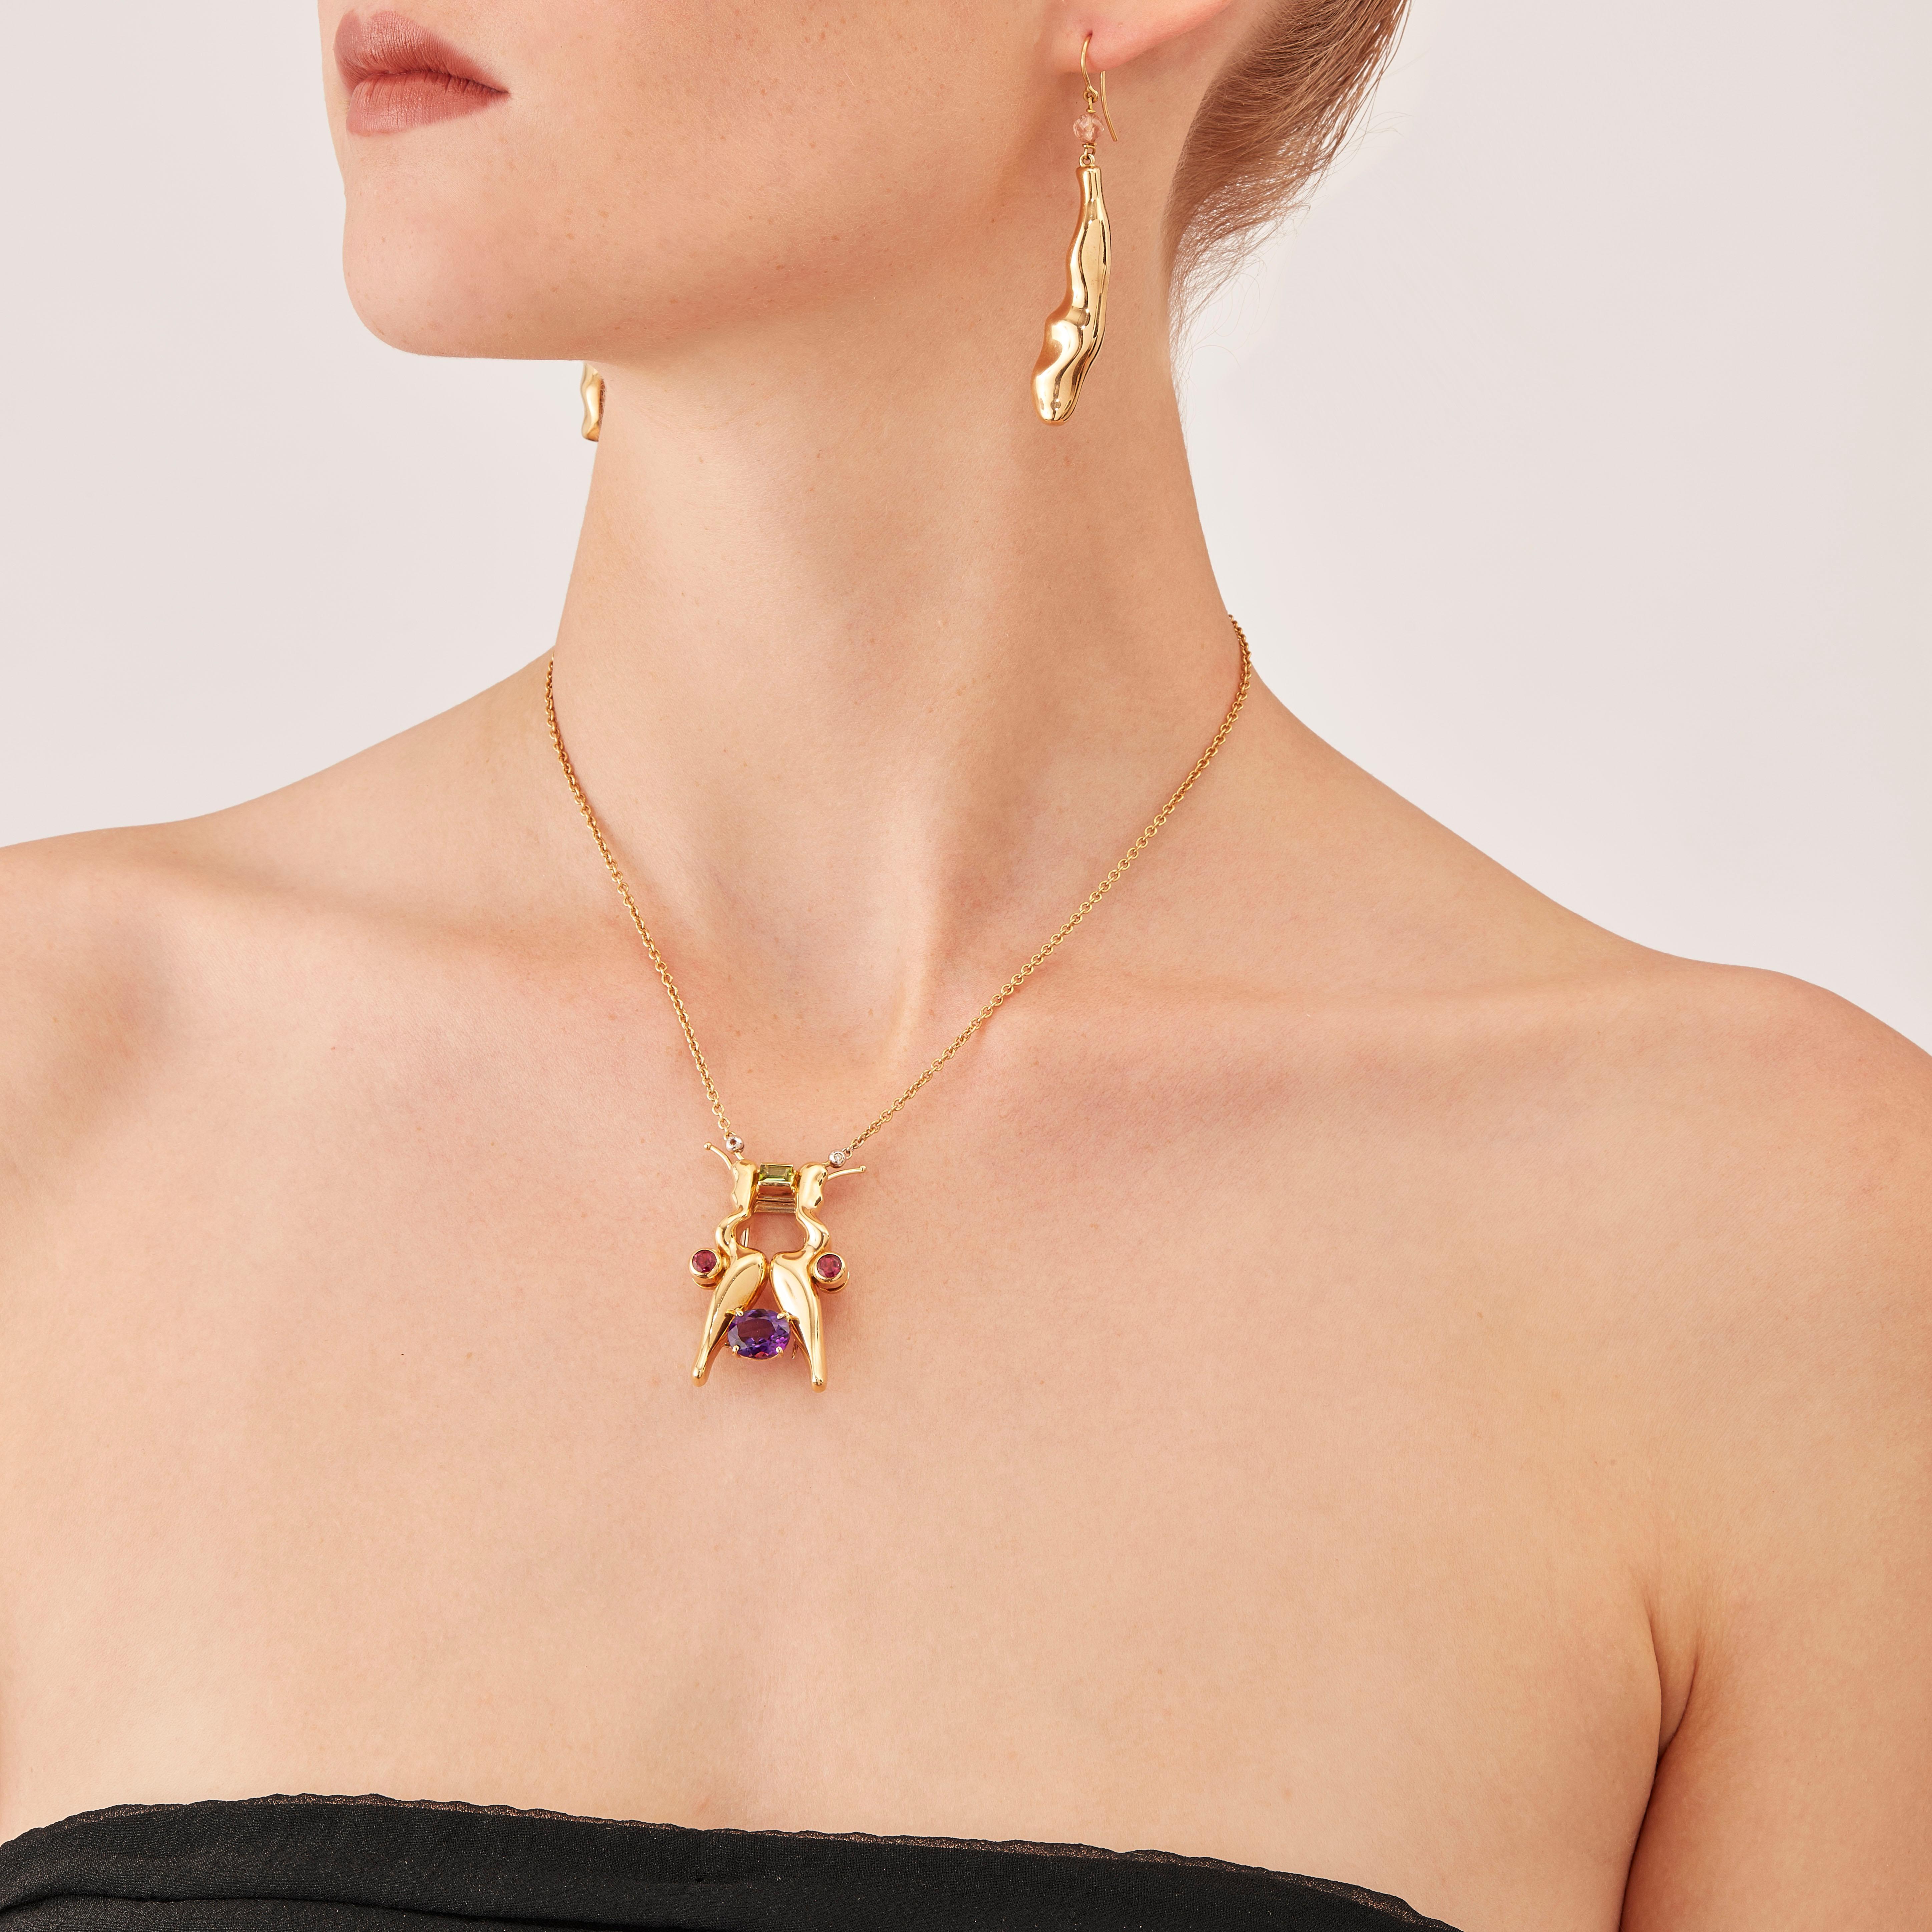 Made by hand in Nathalie Jean's Milan atelier in limited edition, the Mercure Brooch is in 18 karat rosé gold, a warm, sophisticated color close to yellow gold. Small, delicate, ebbing sculptures with seemingly random forms, these supple shapes are